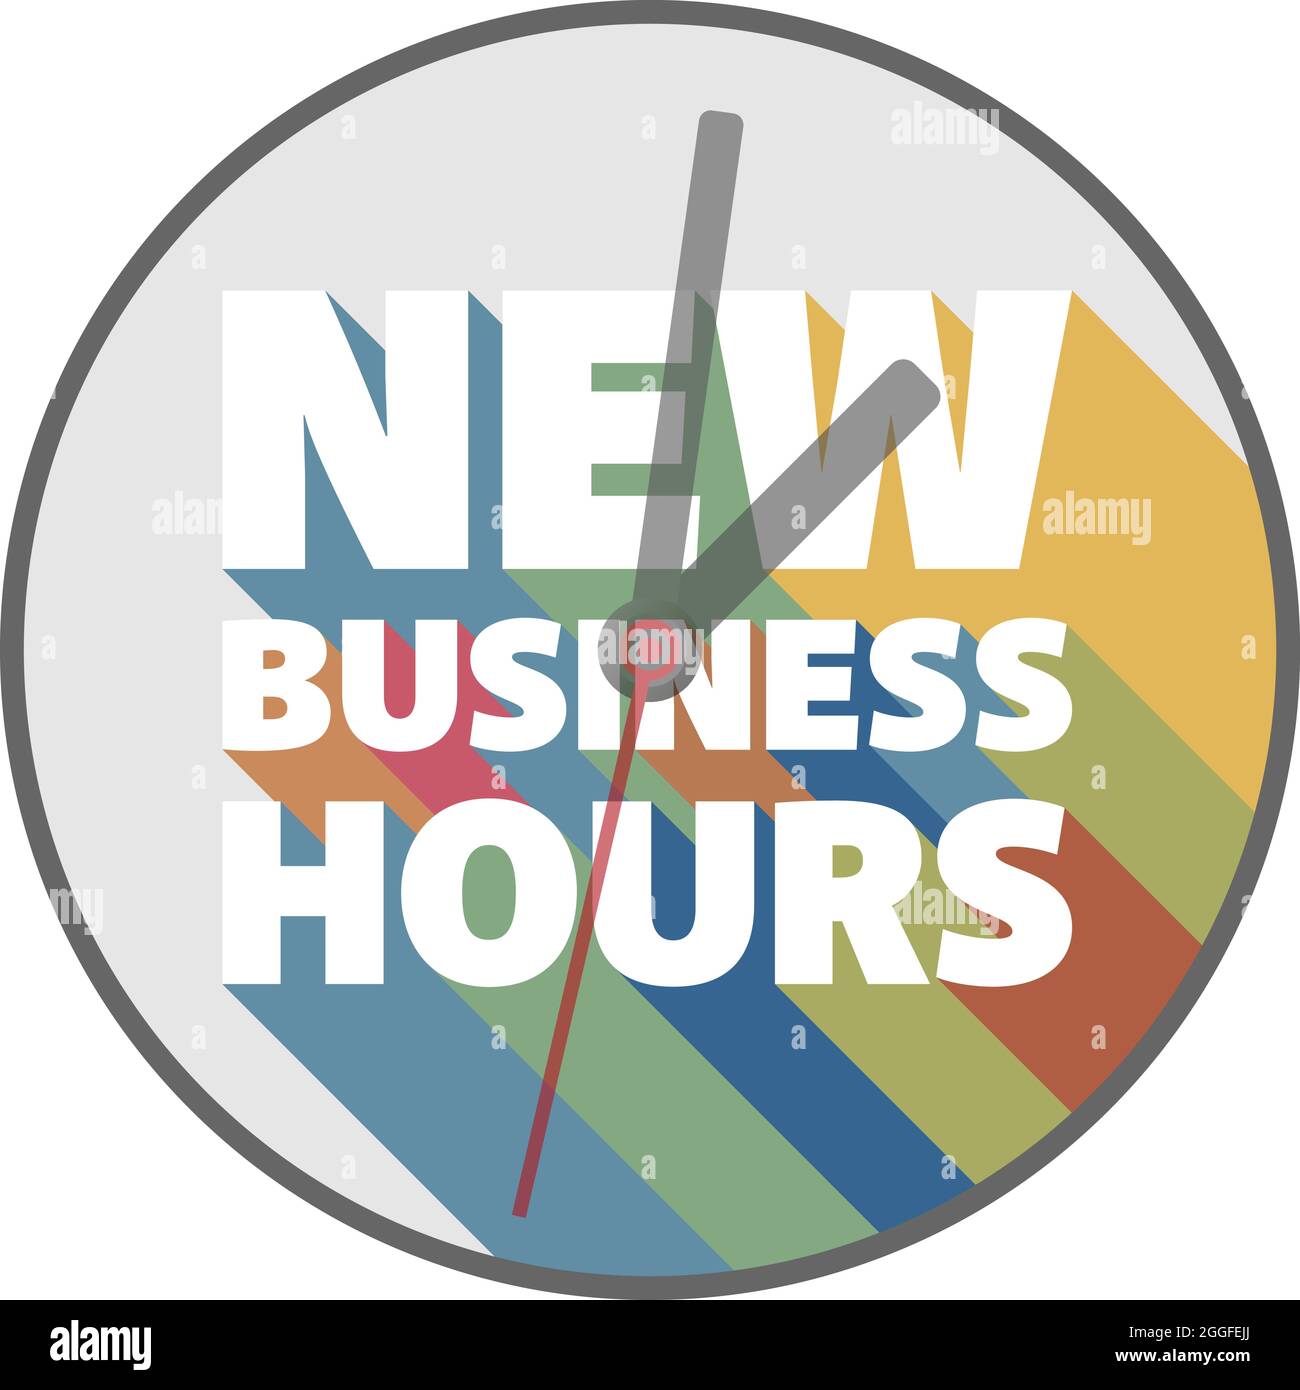 round sticker with text NEW BUSINESS HOURS with colorful drop shadows, vector illustration Stock Vector